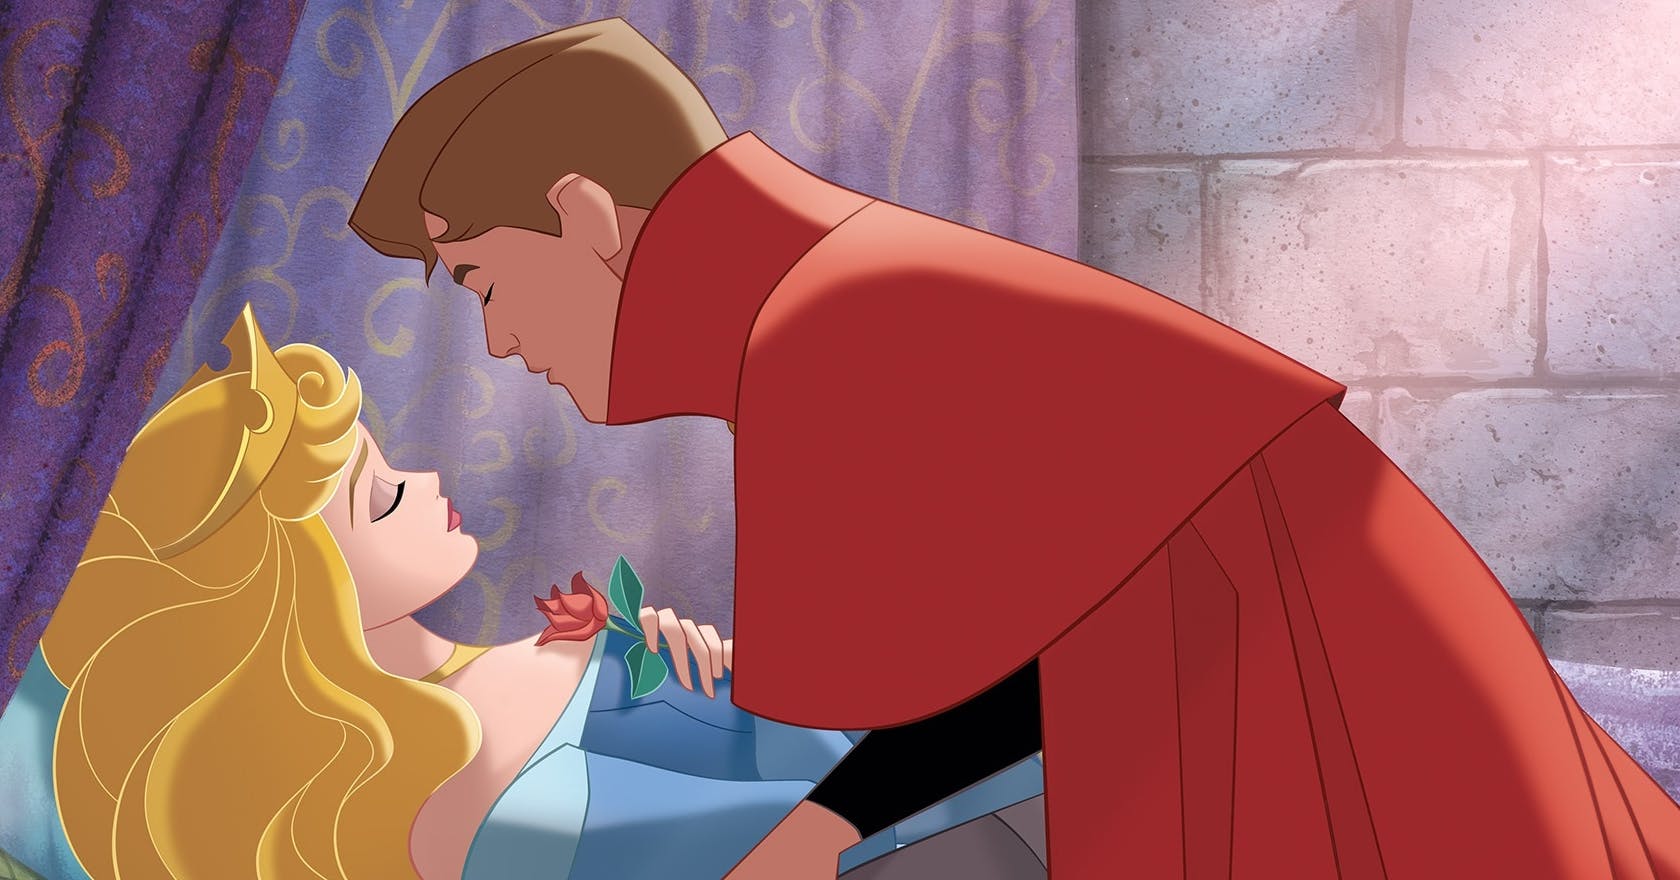 Does Sleeping Beauty Promote A Dangerous Message About Sexual Consent